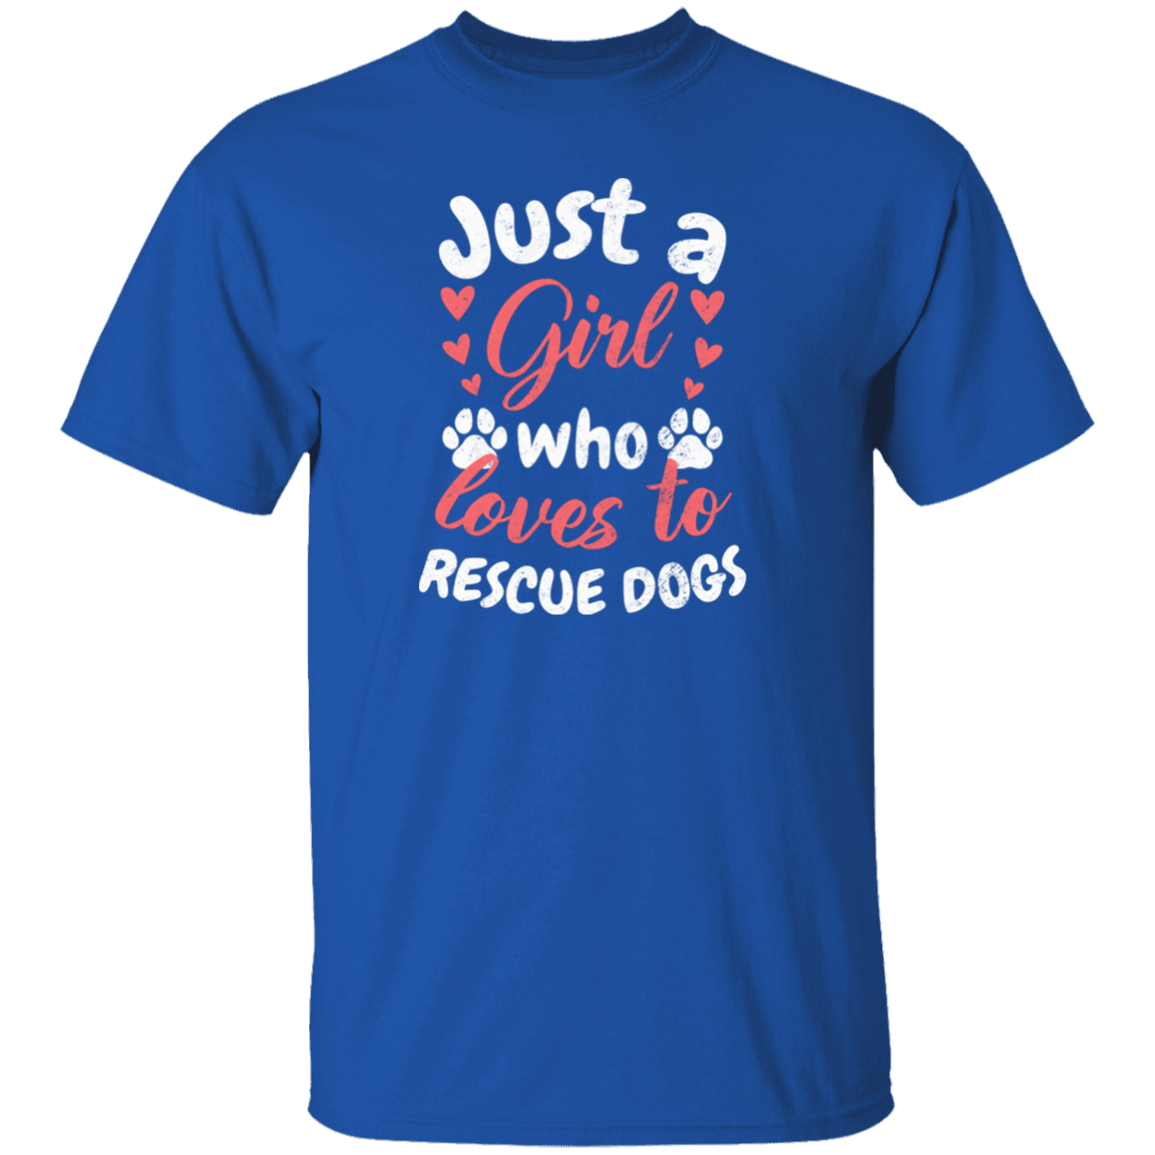 Just A Girl Who Loves To Rescue Dogs - T Shirt.